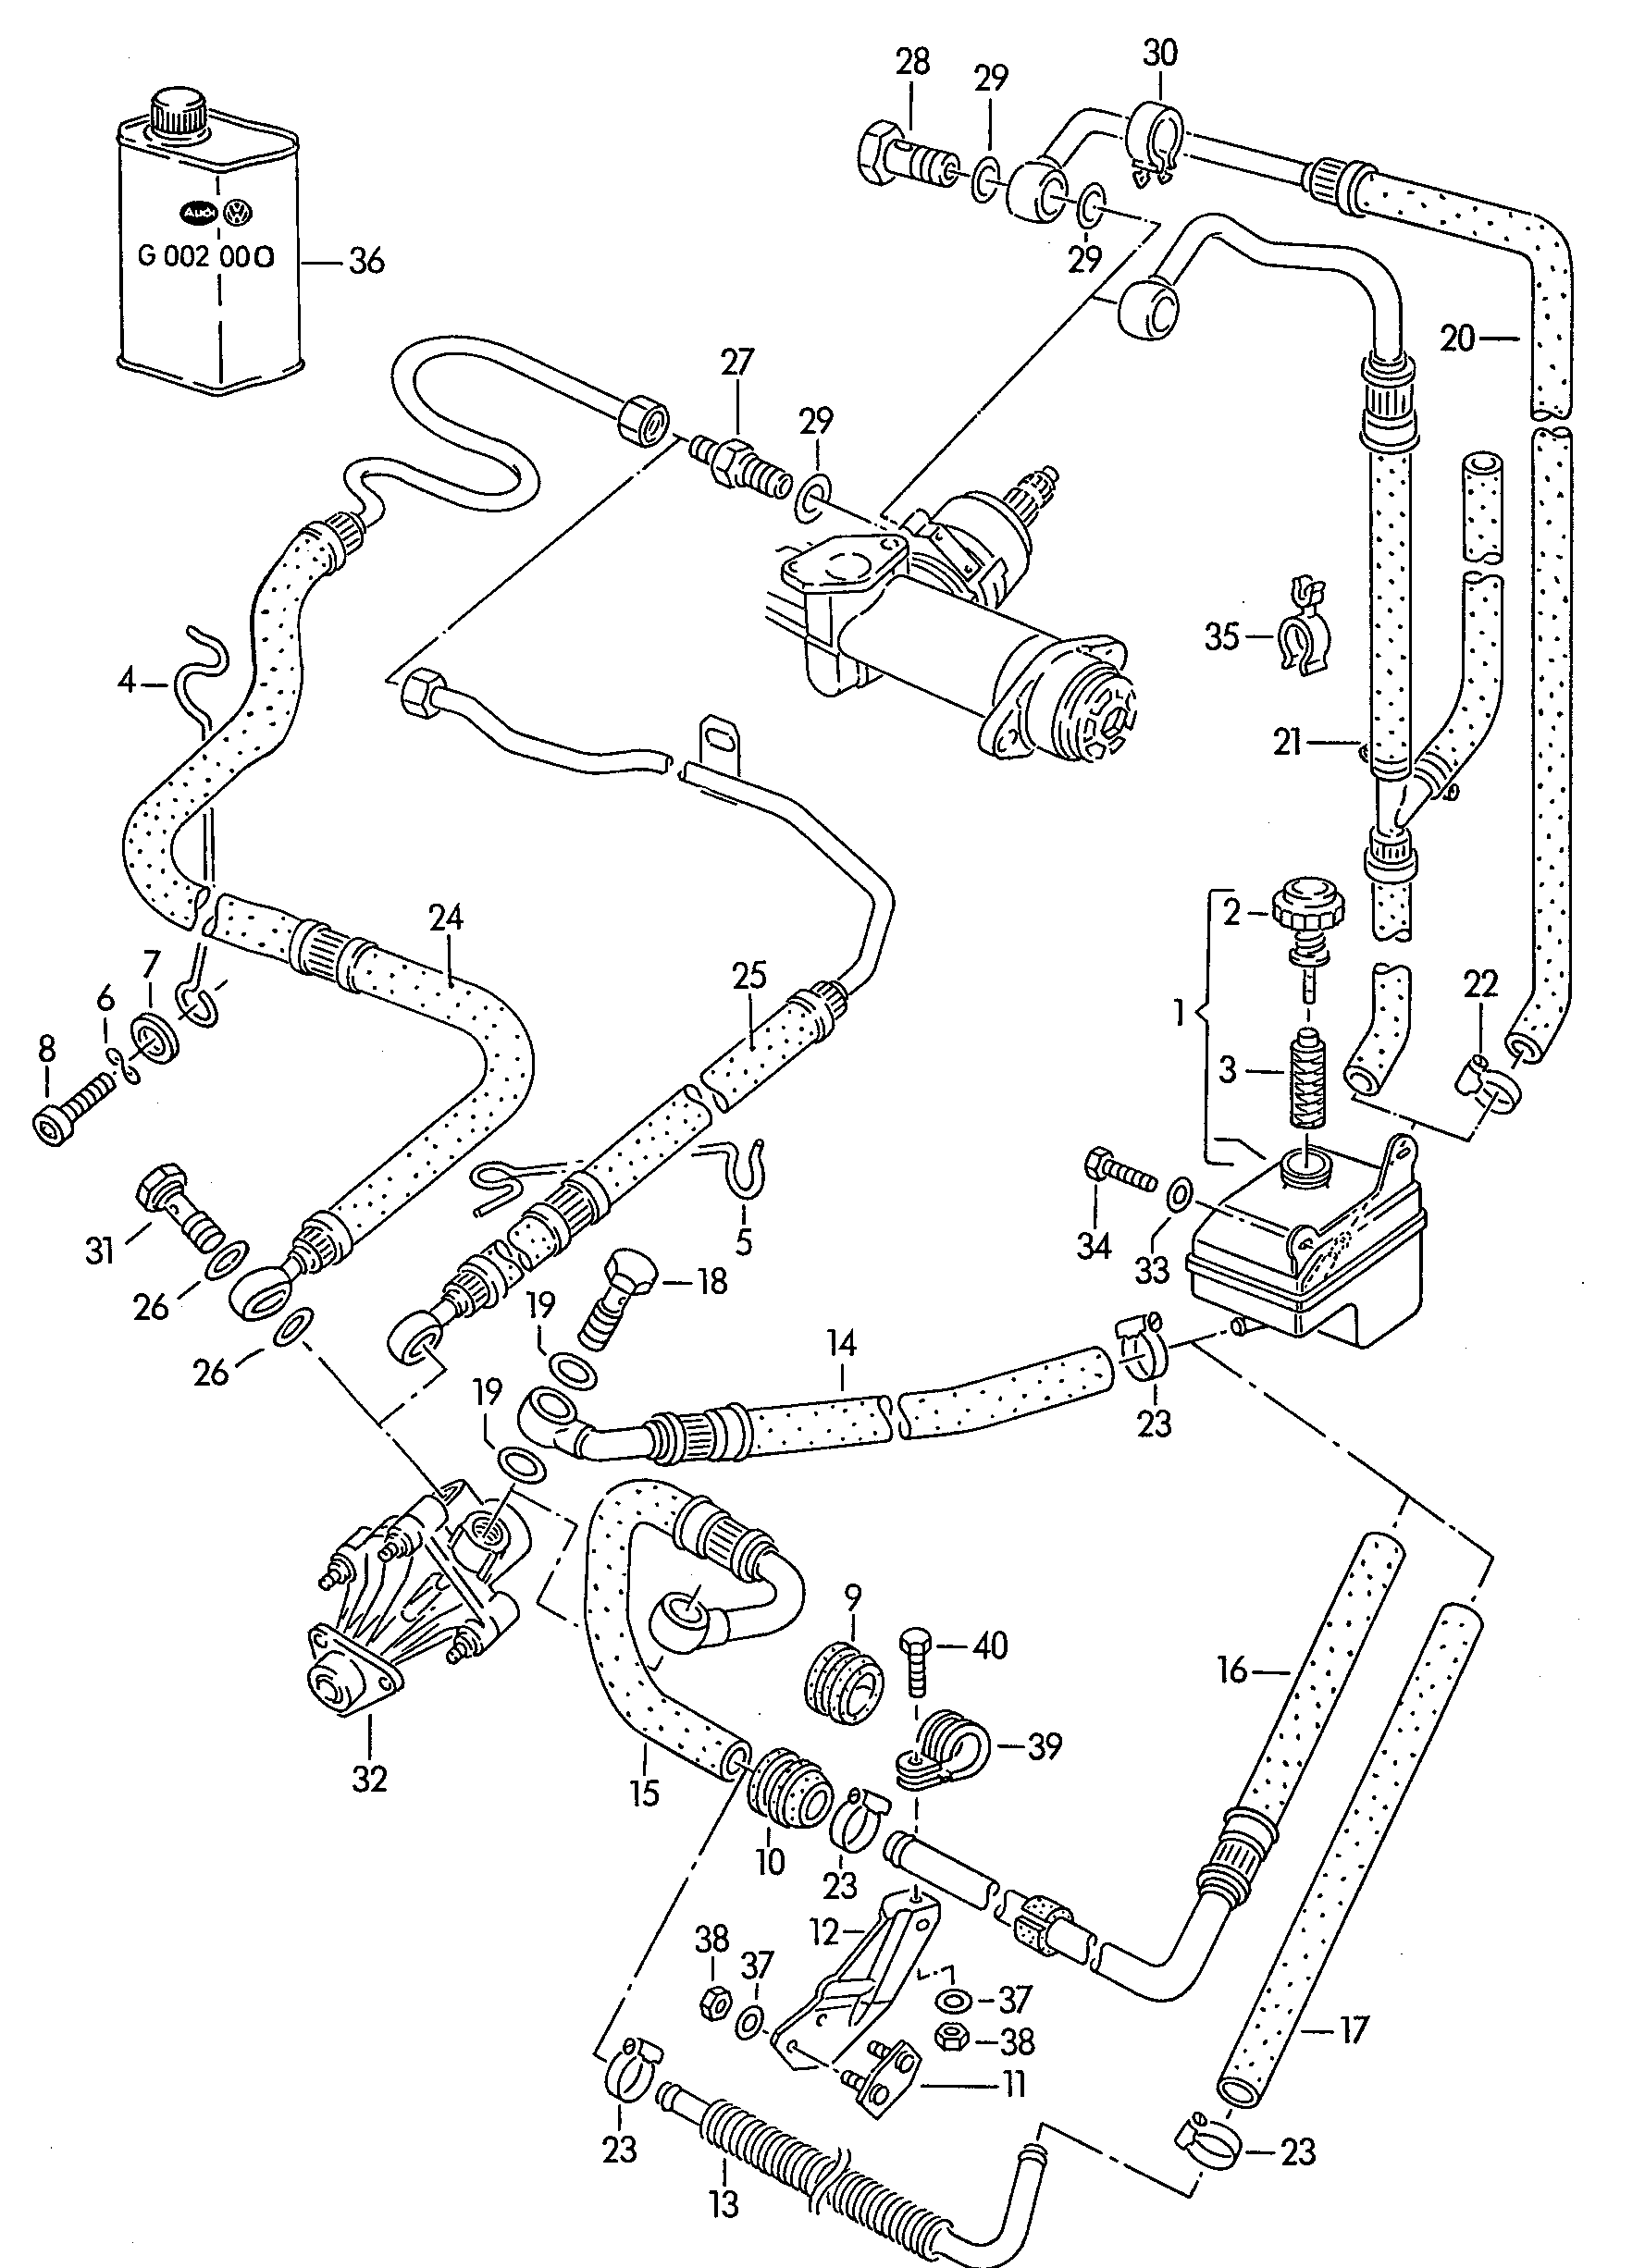 oil container and connection
parts, hoses - Audi 80/90/Avant(A80)  